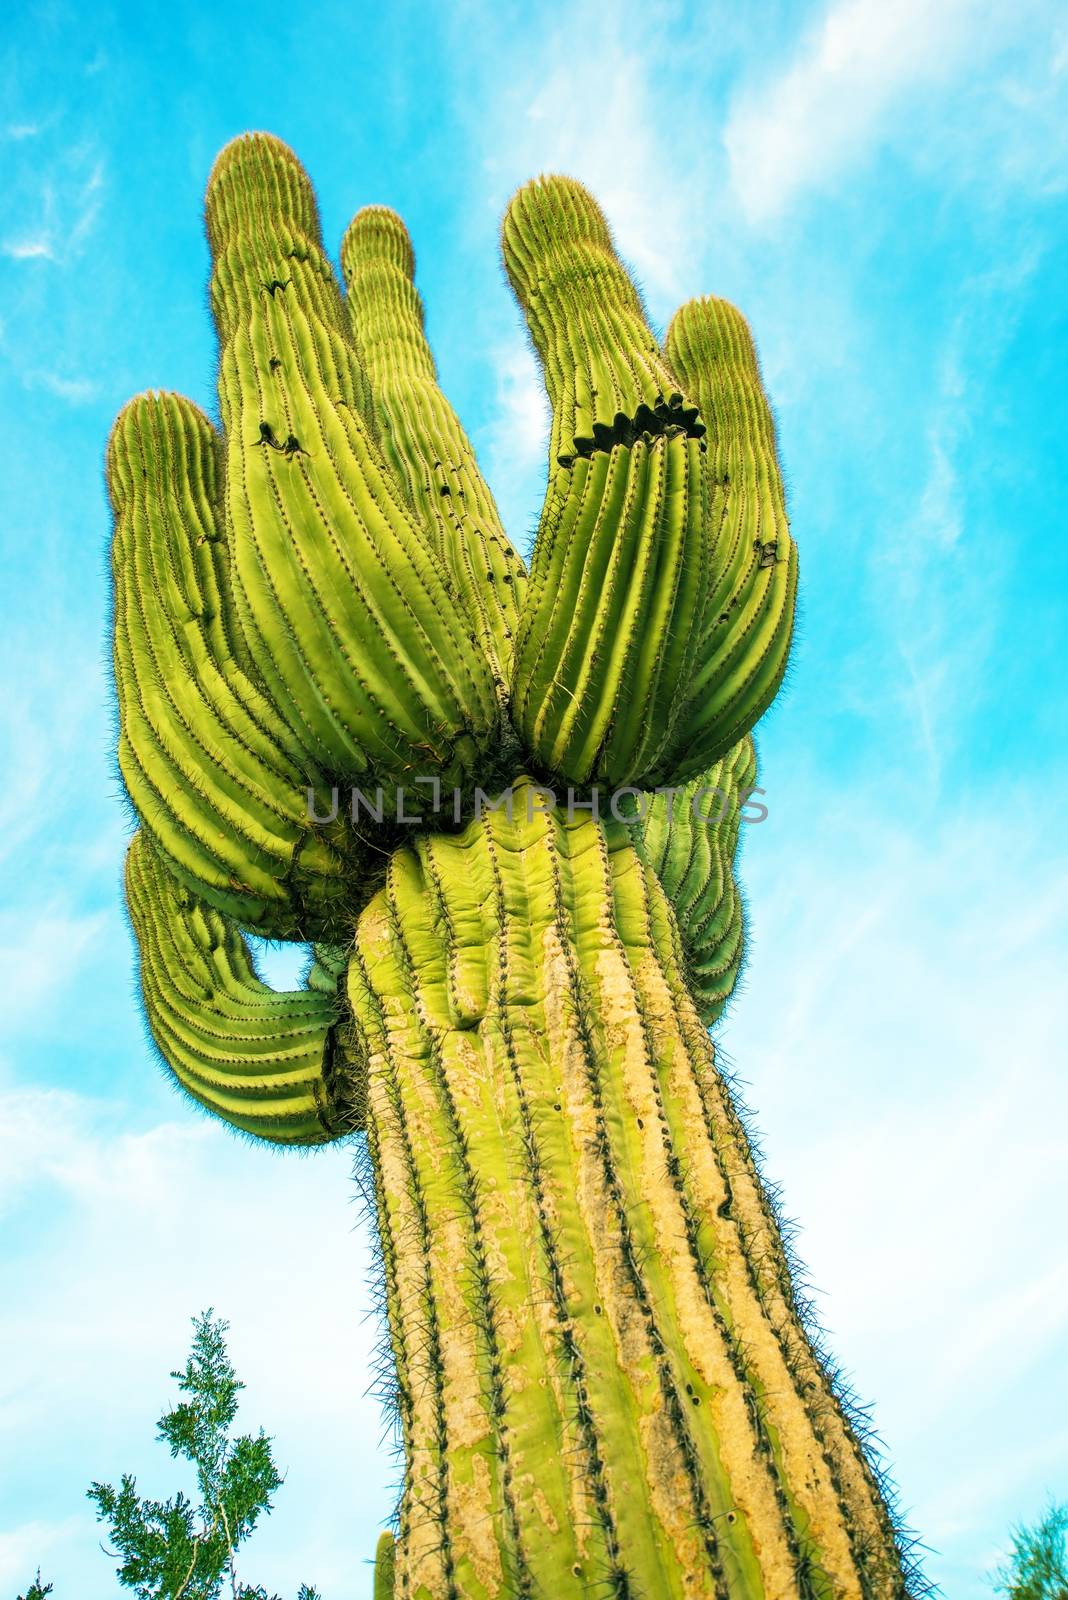 Arizona Organ Pipe Cactus. Organ Pipe Cactus is a Specie of Cactus Native to Mexico and the United States.